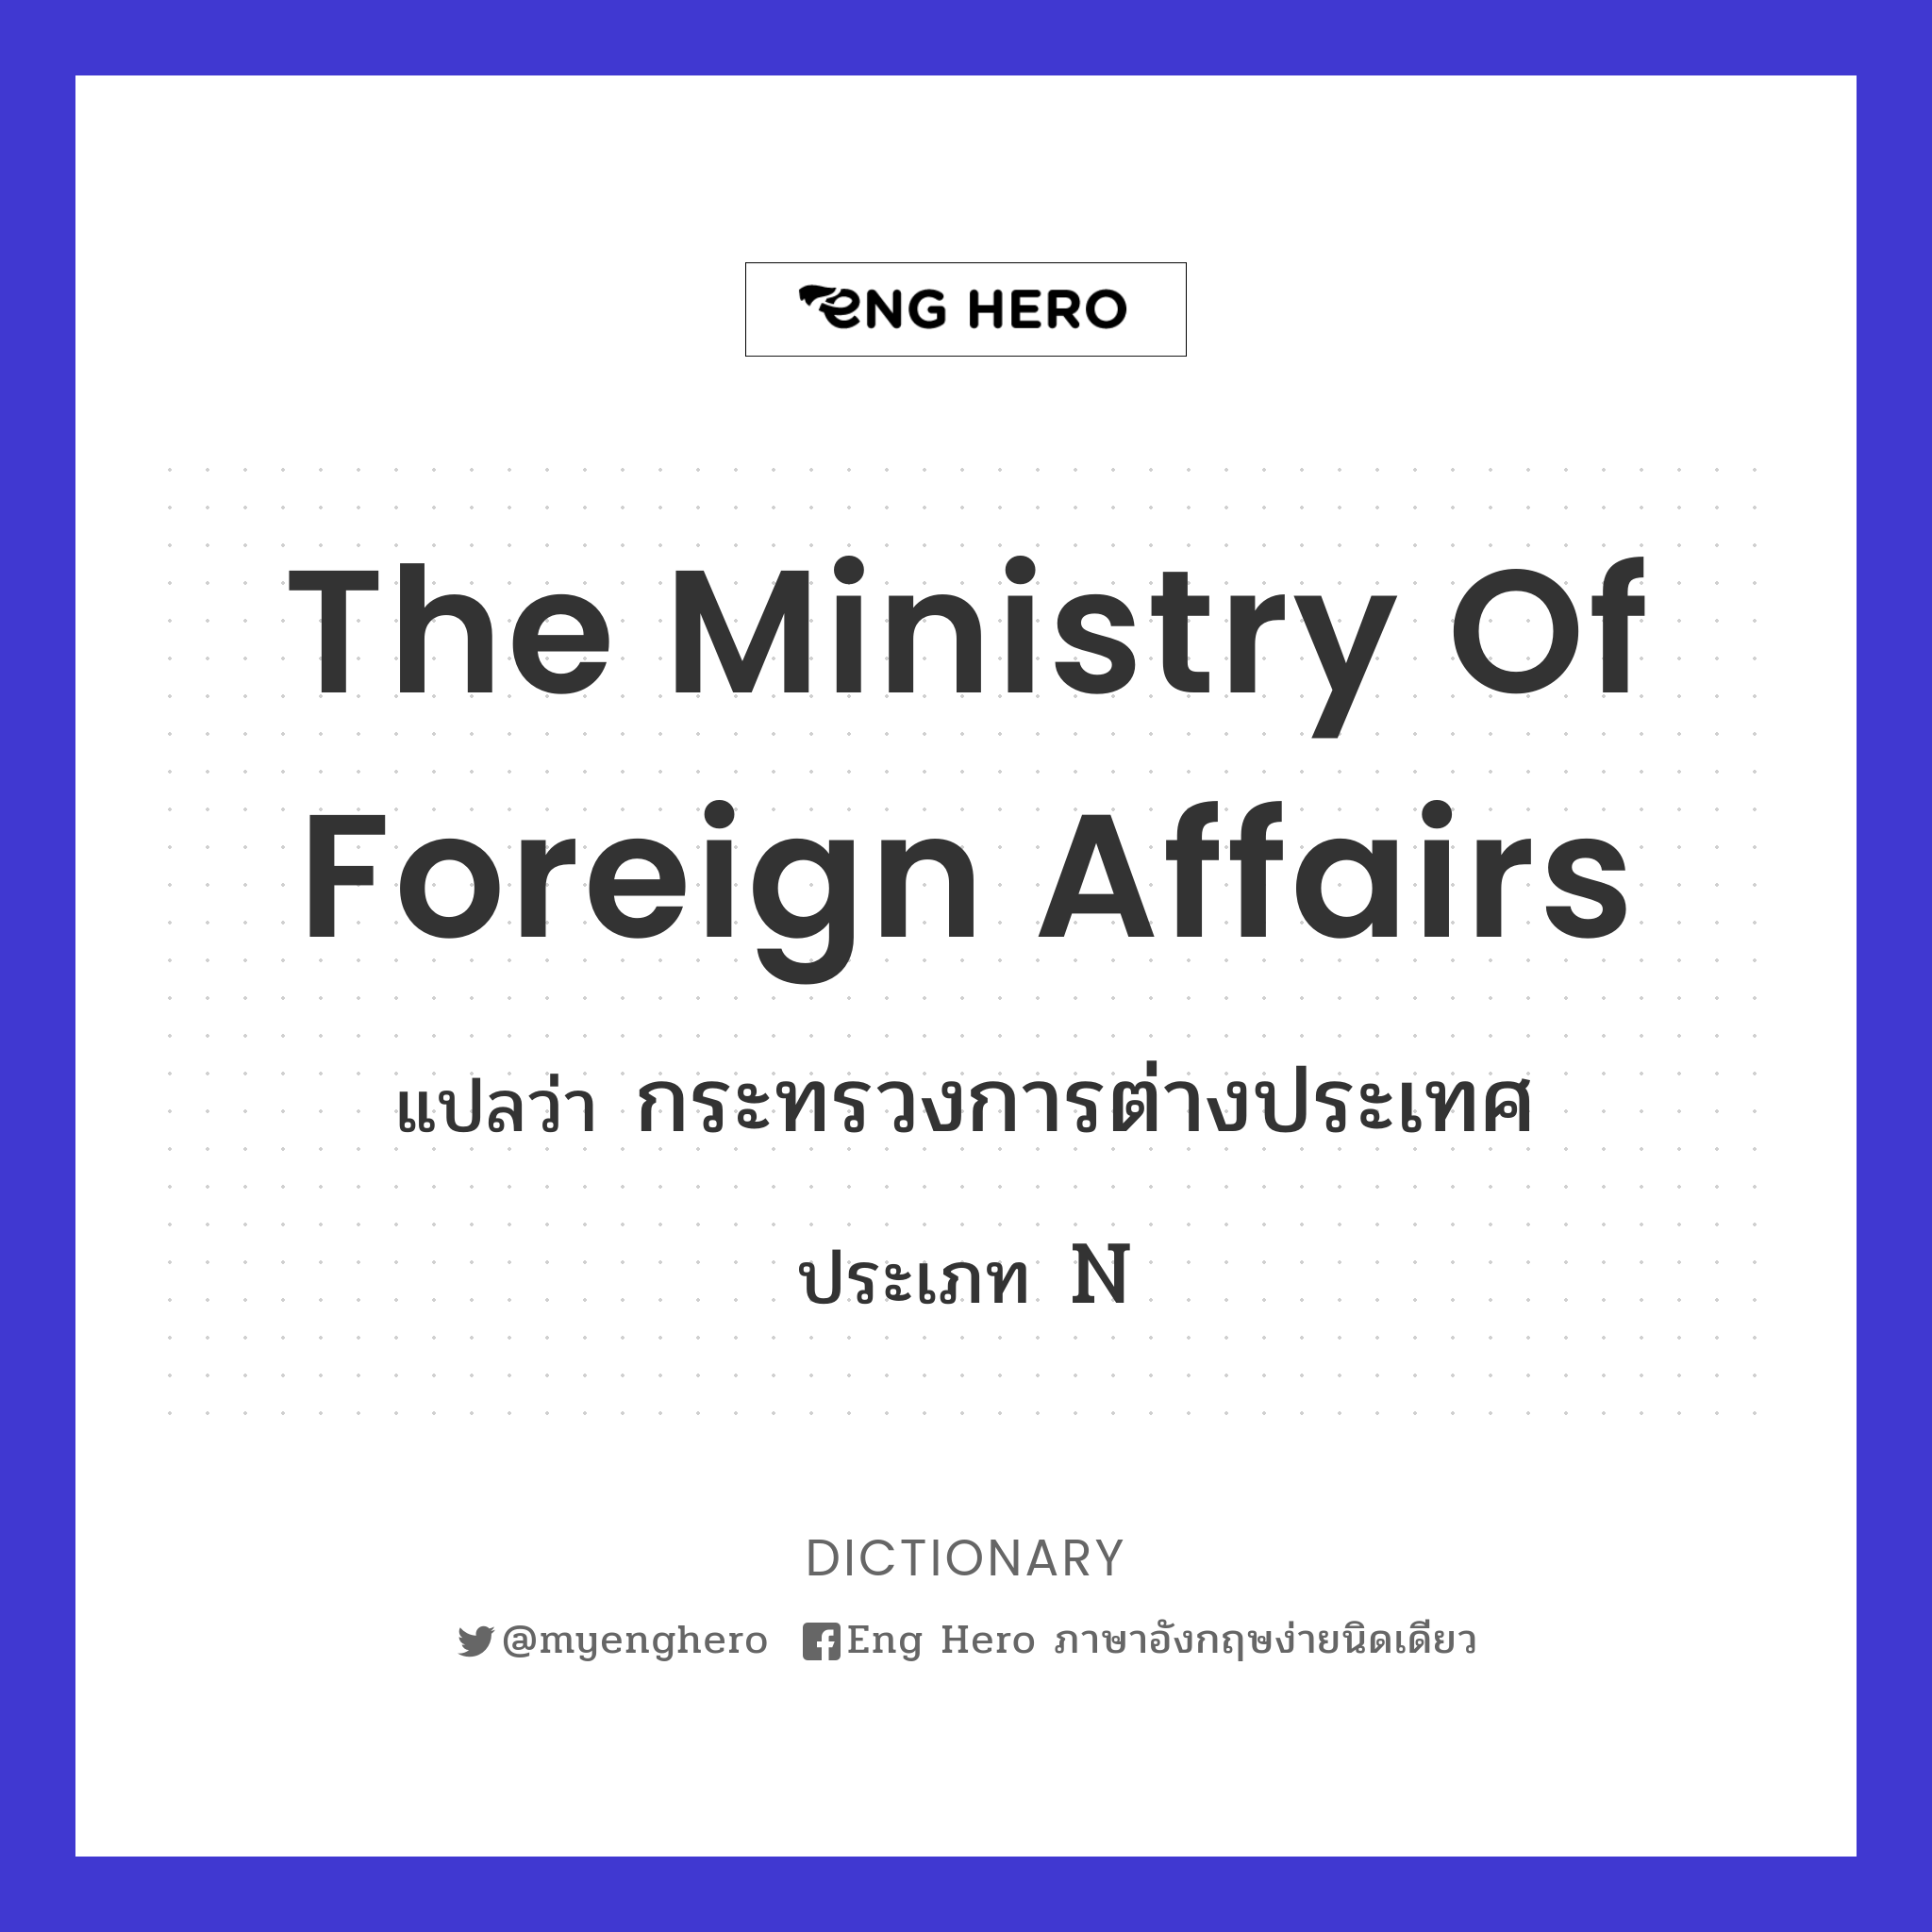 The Ministry of Foreign Affairs